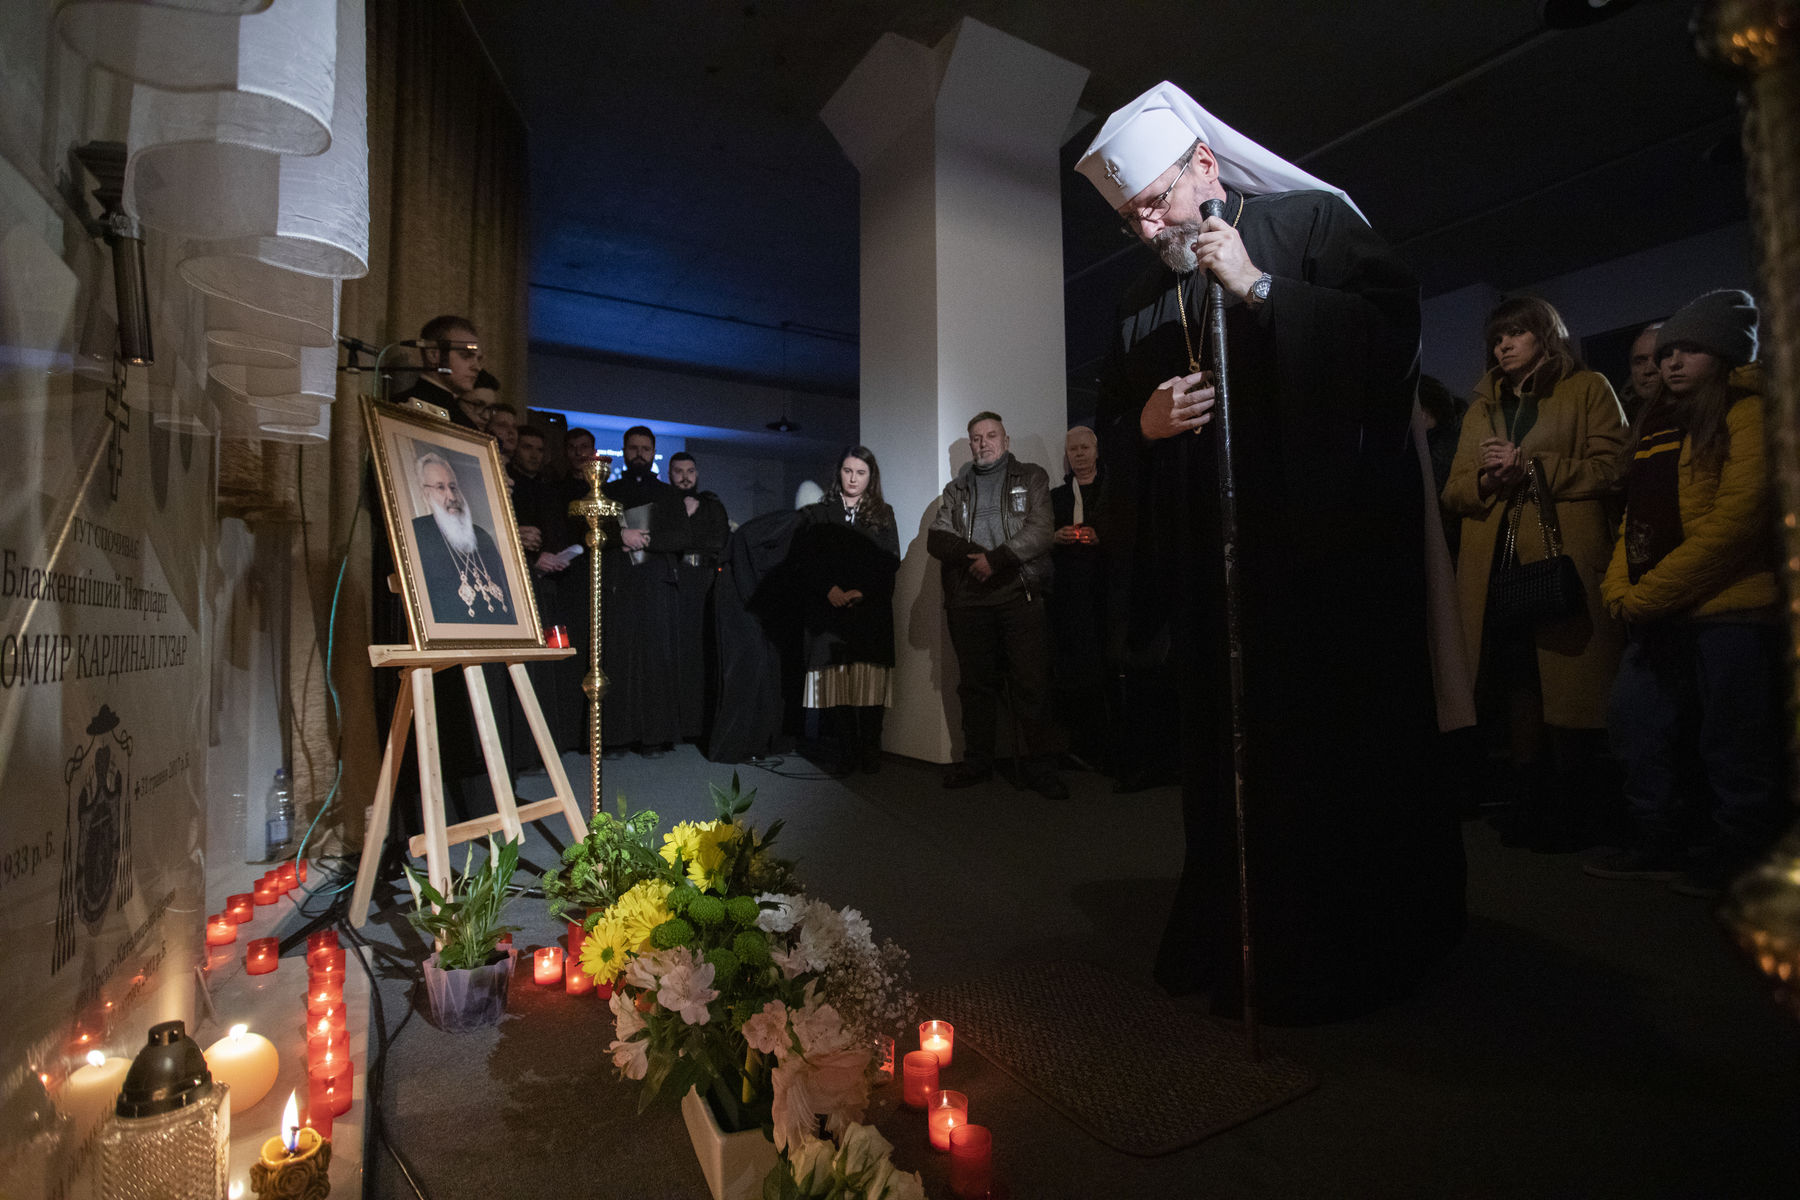 “Sing us a song of peace and love”: His Beatitude Sviatoslav solemnly declared the Year of Patriarch Lubomyr Husar